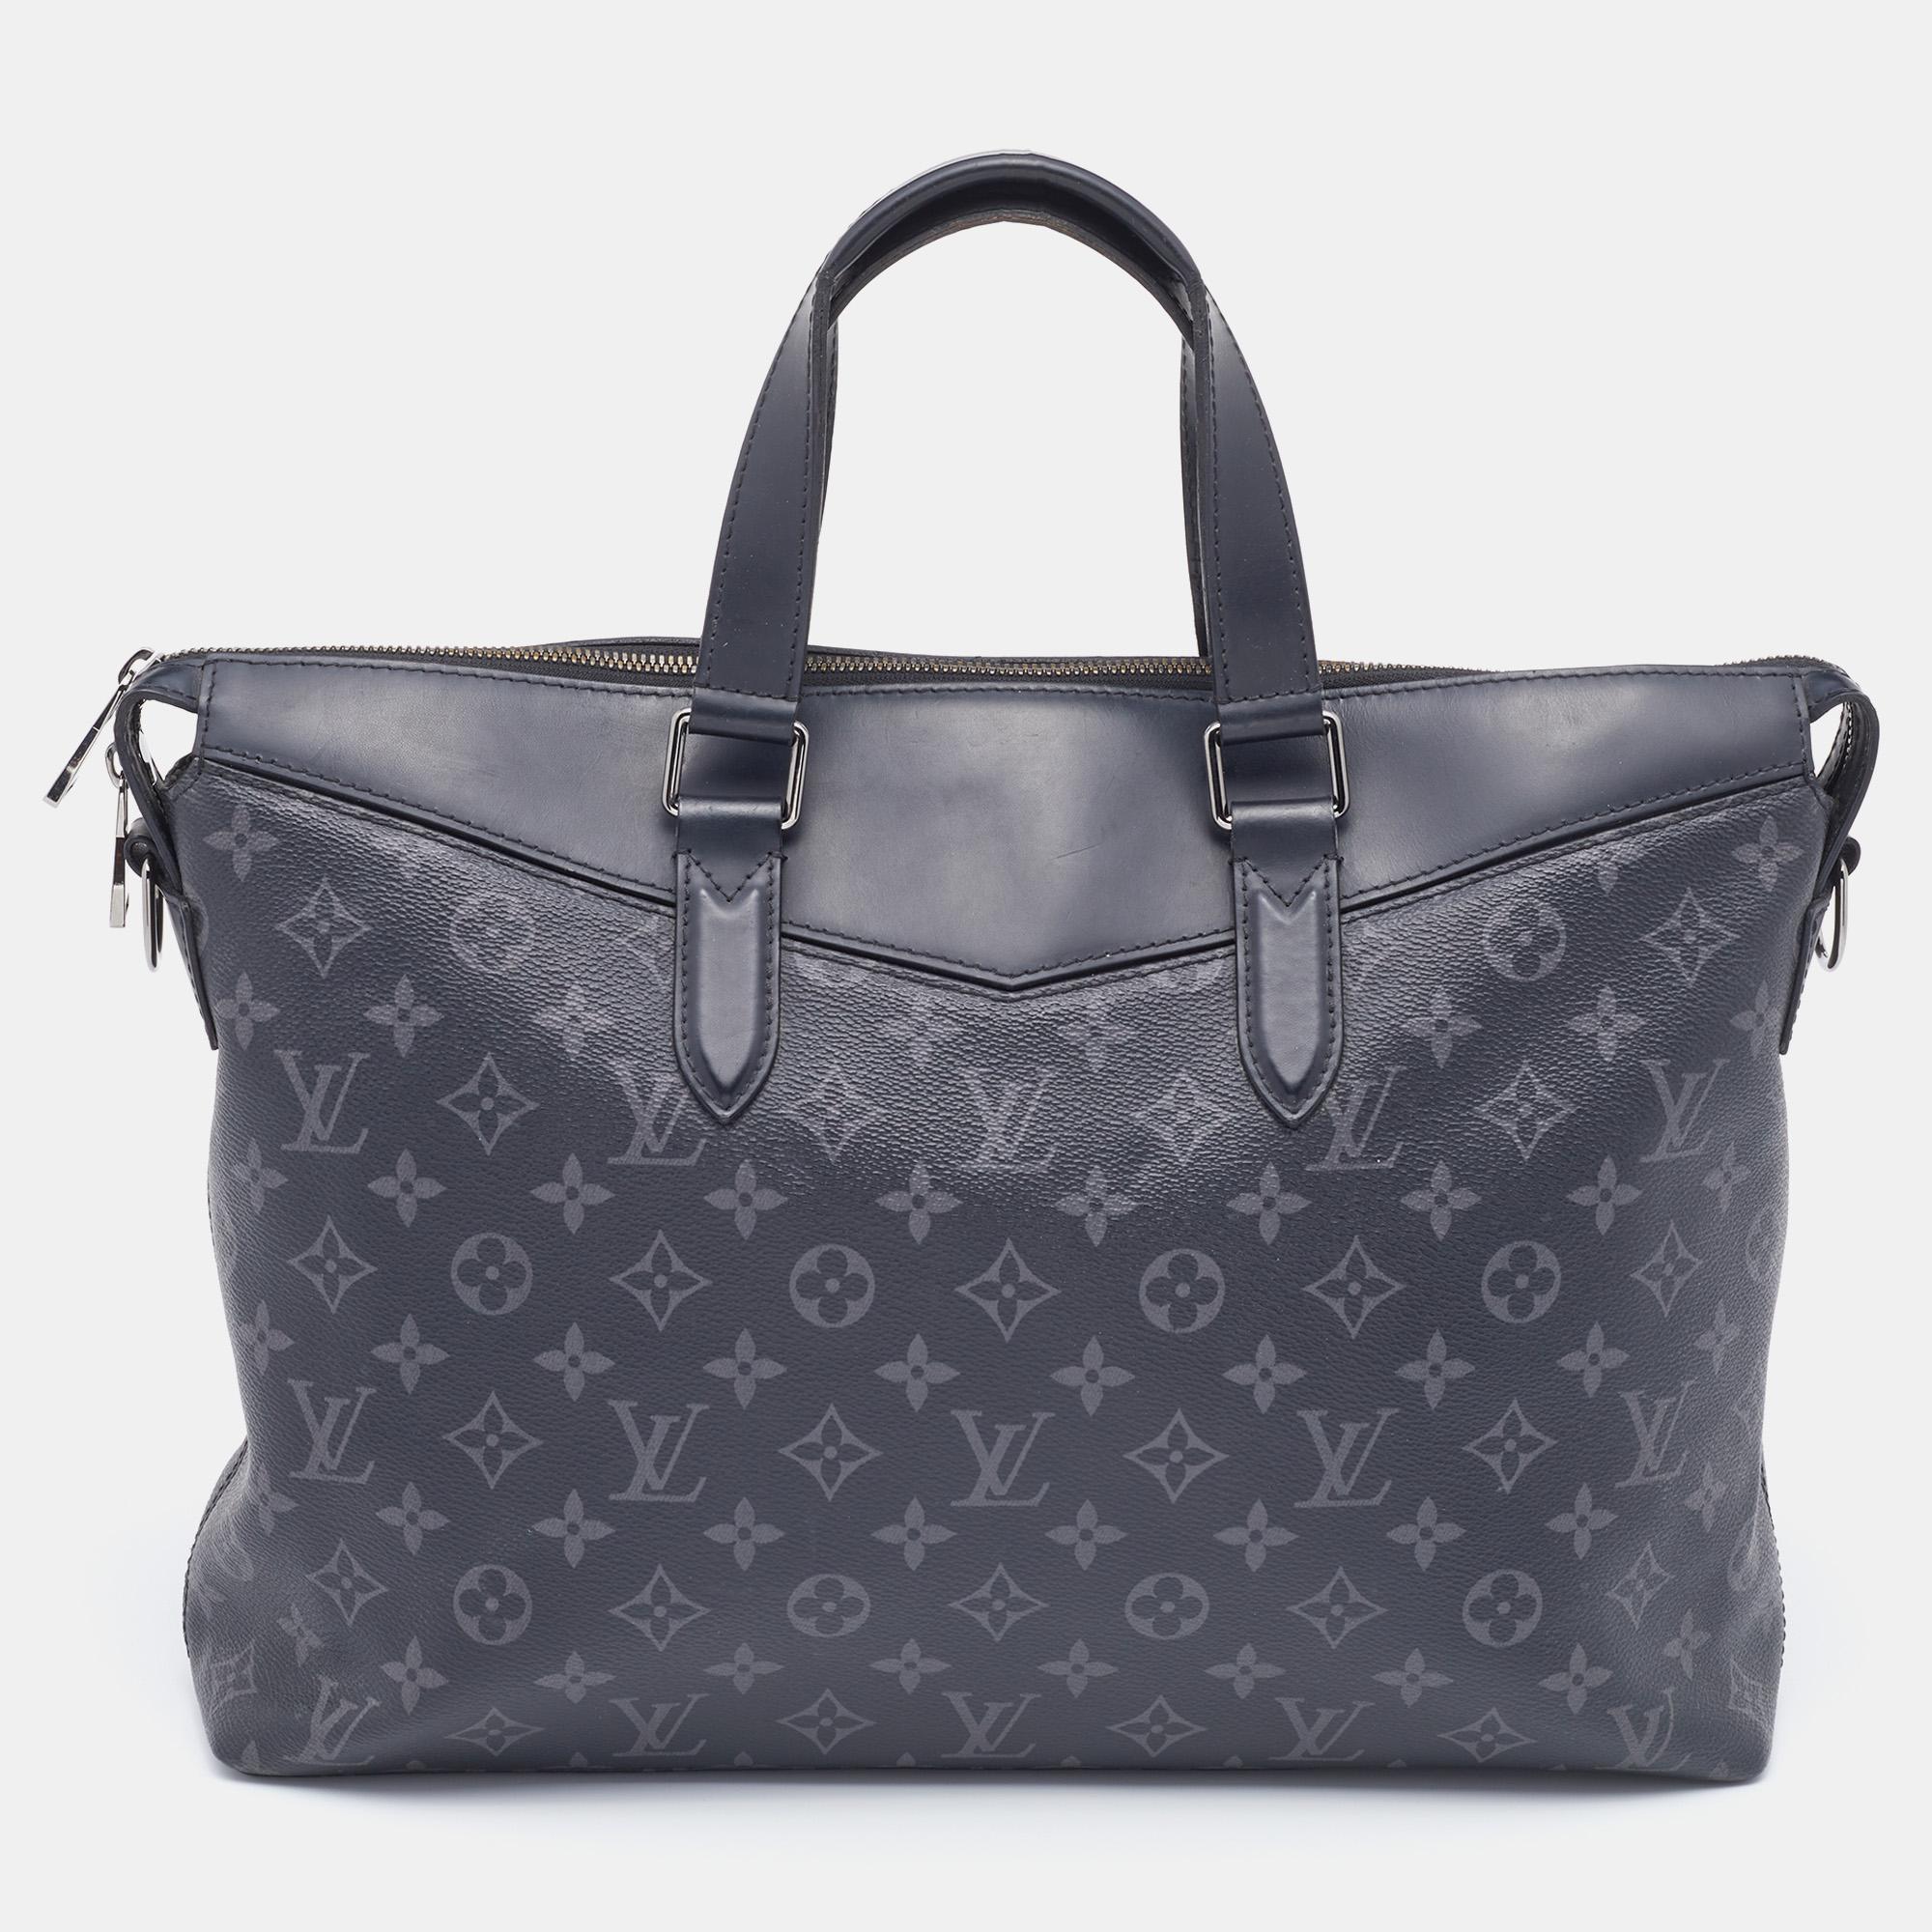 This luxe briefcase from Louis Vuitton is smooth, practical, and stylish for everyday use. Crafted from coated canvas and leather, it displays a zip closure, two handles, and a spacious fabric interior. For convenience, it is provided with an